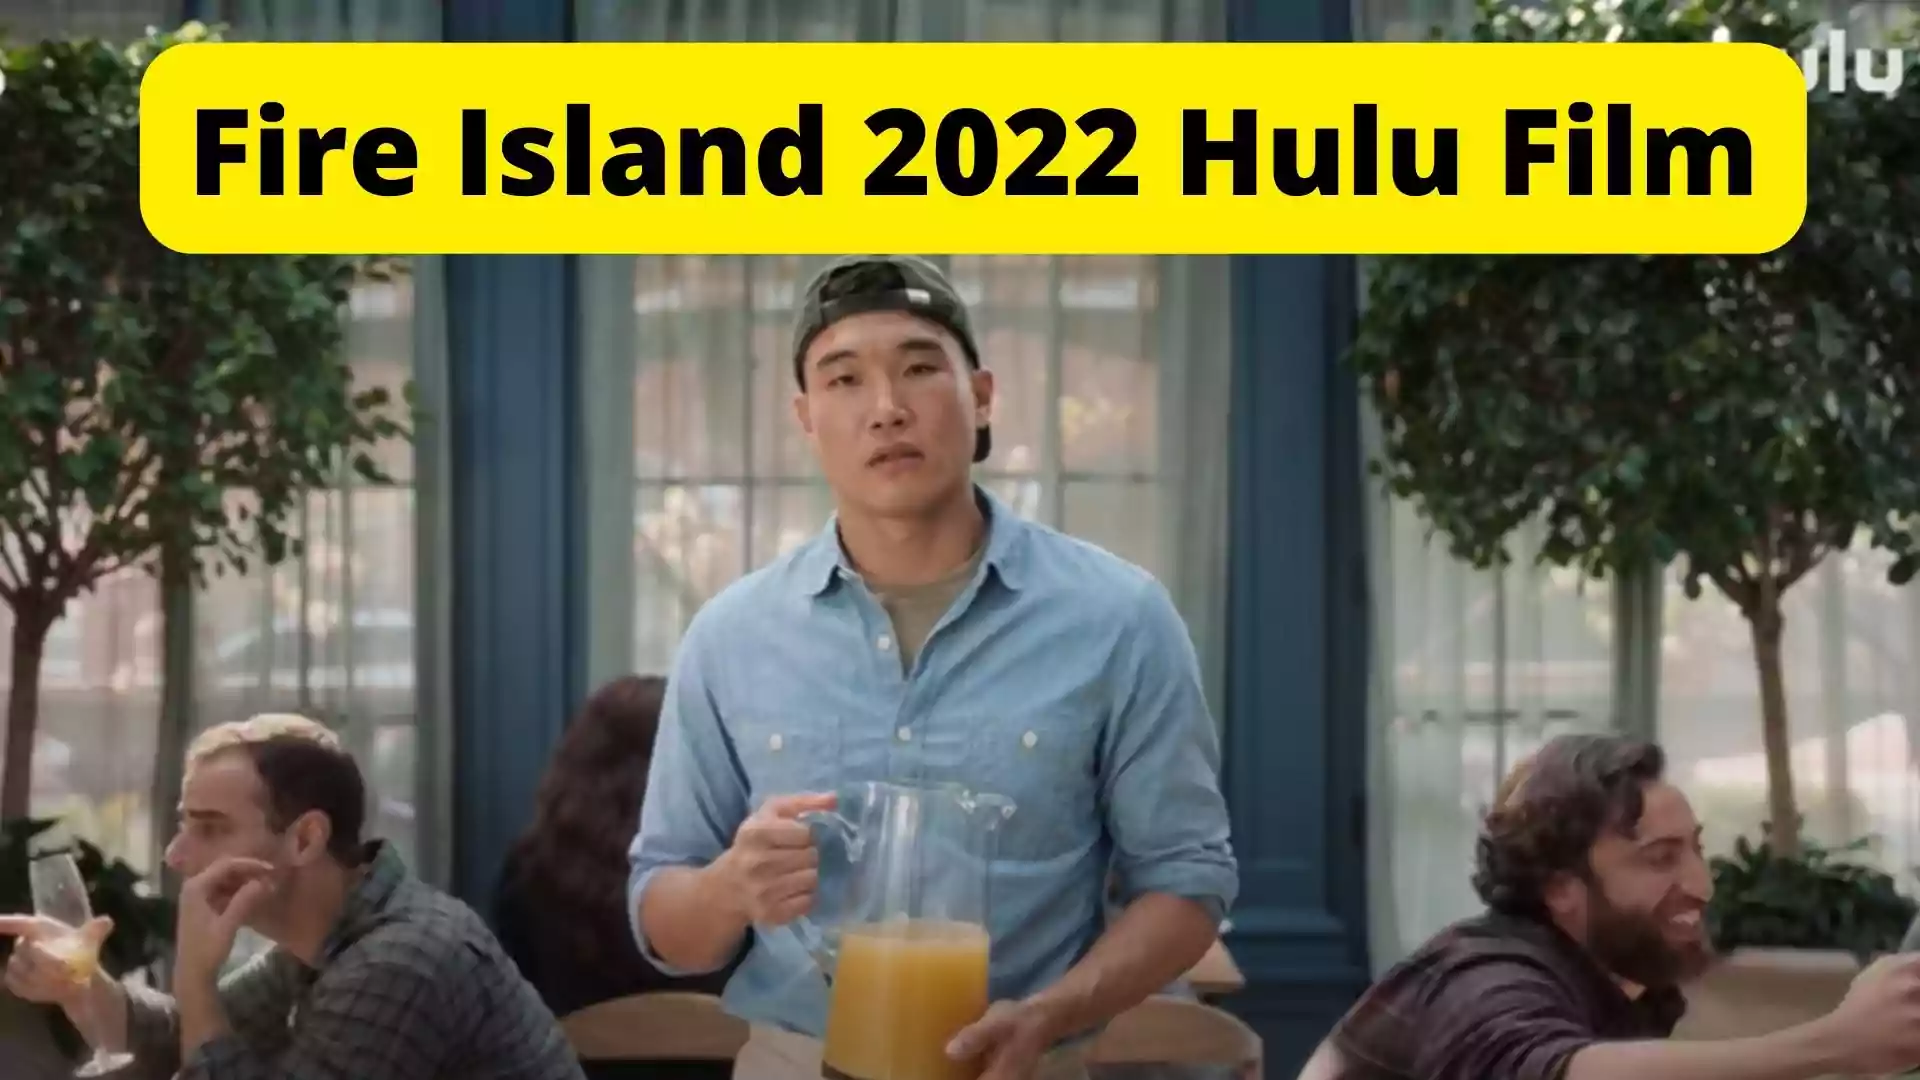 Fire Island Parents Guide. Fire Island Age Rating. 2022 Hiulu film Fire Island release date, cast, production, overview, trailer and images.